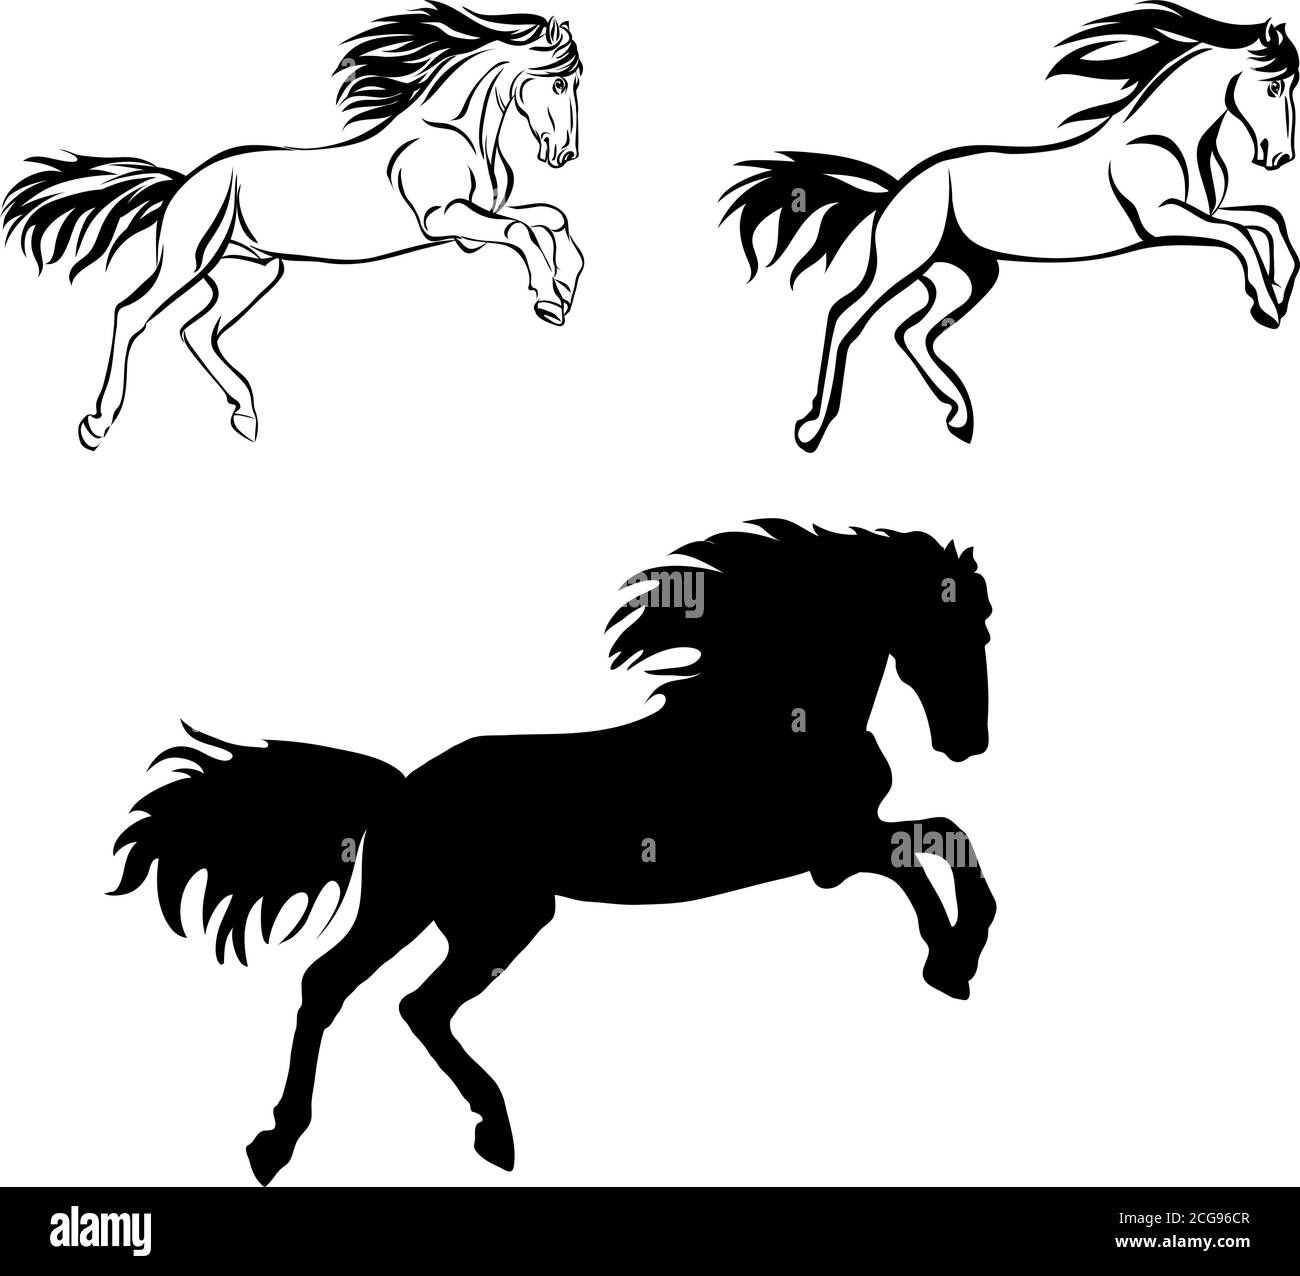 Horse, drawing, black, silhouette, symbol, illustration, image, picture, isolated, races, vector, line, gallop, head, mane, stallion, stock-raising Stock Vector